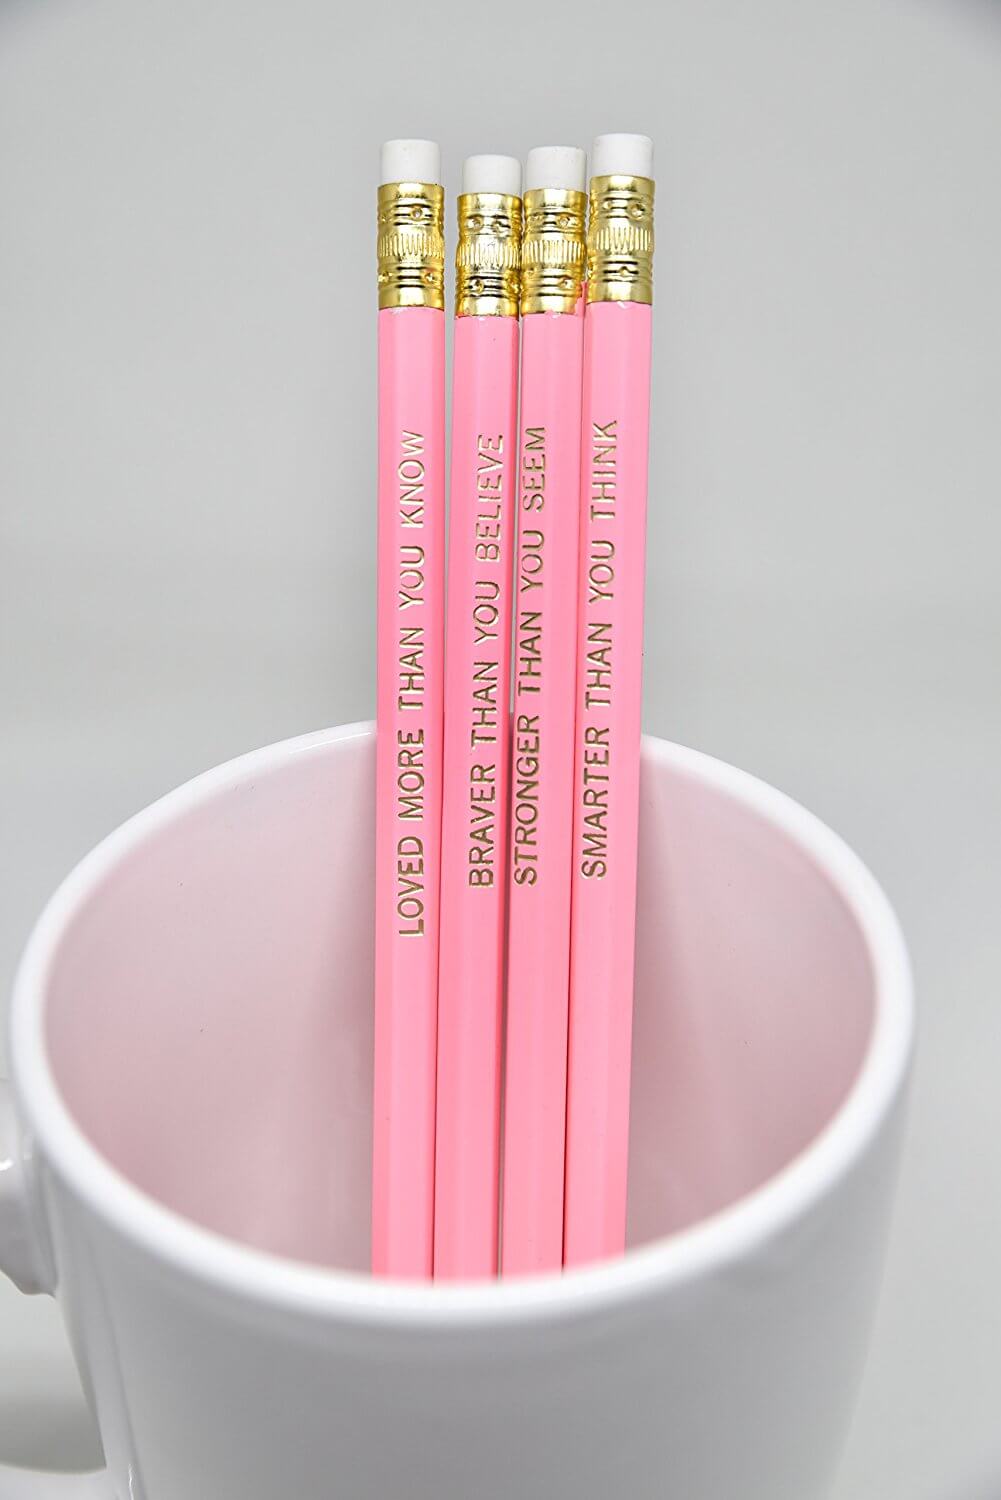 Set of 4 Pencils Engraved with Affirmations